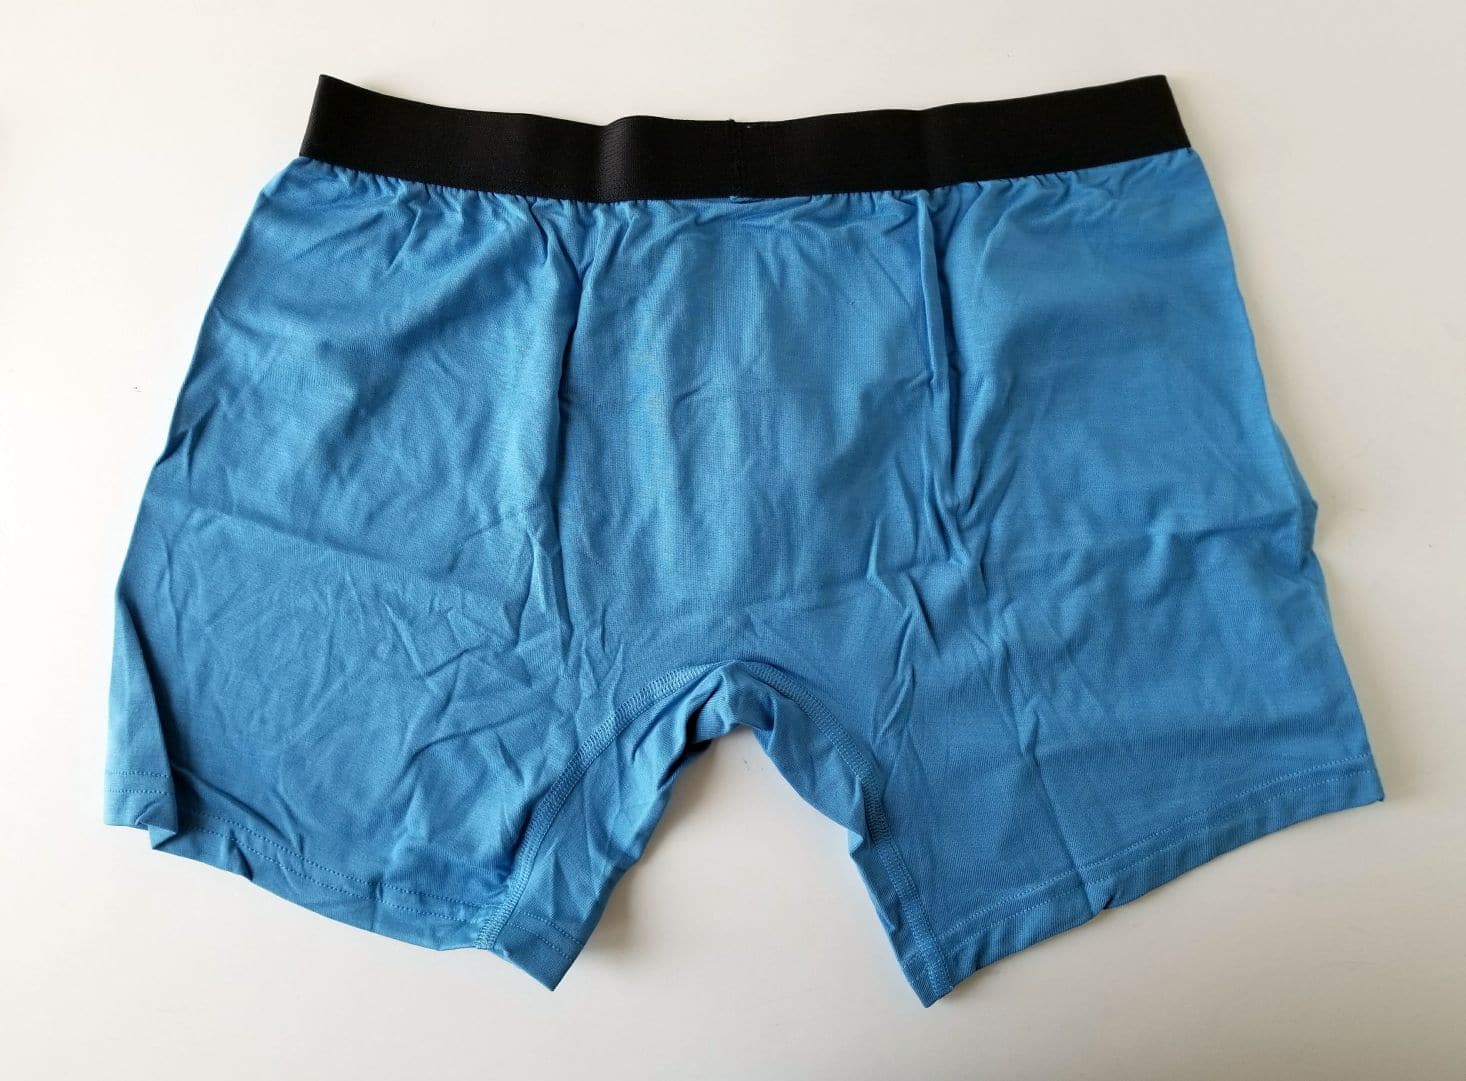 MeUndies for Men Underwear Subscription Review - May 2017 | MSA